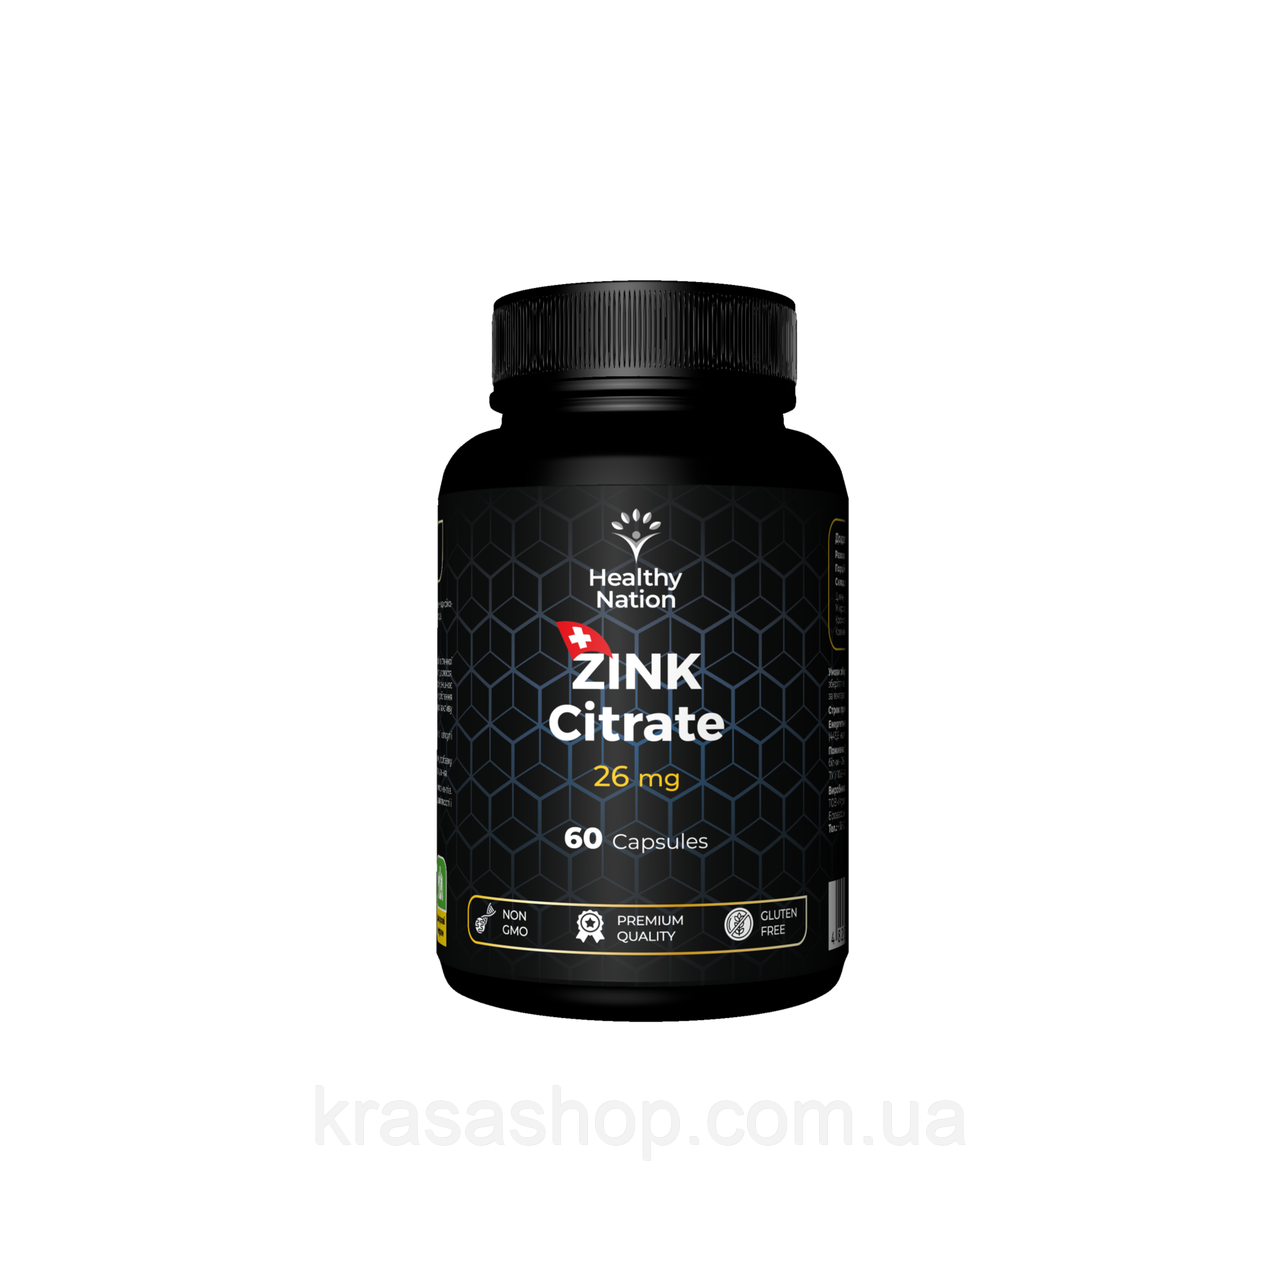 Healthy Nation - Цинк цитрат Zink Citrate 26 mg (60 капс)